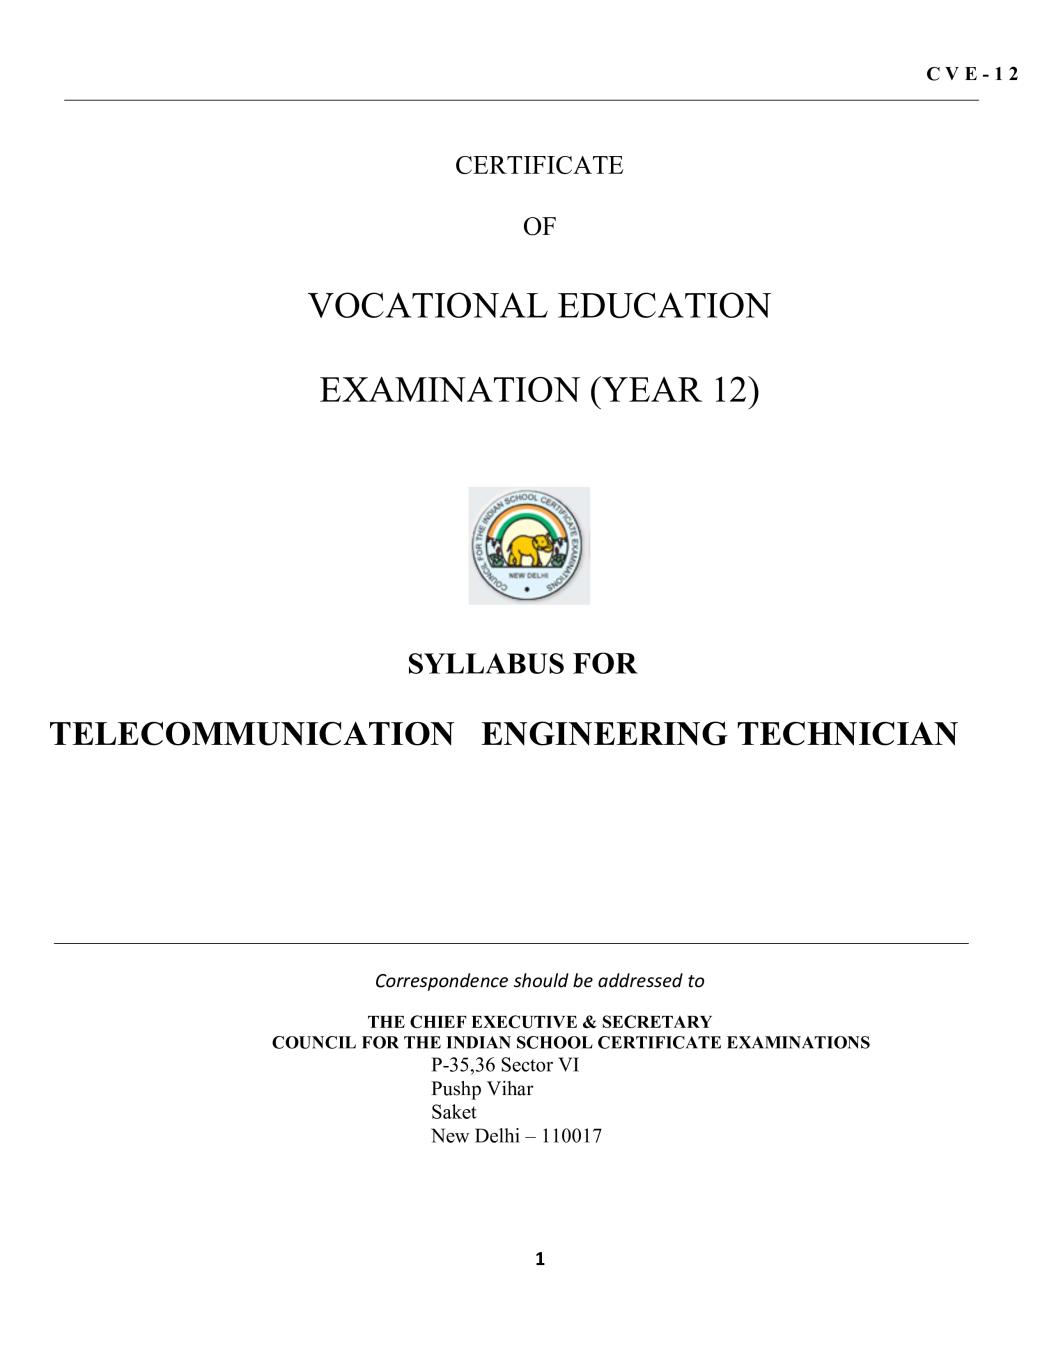 ISC Class 12 Telecommunication Engineering Technician Syllabus (Vocational Course) - Page 1